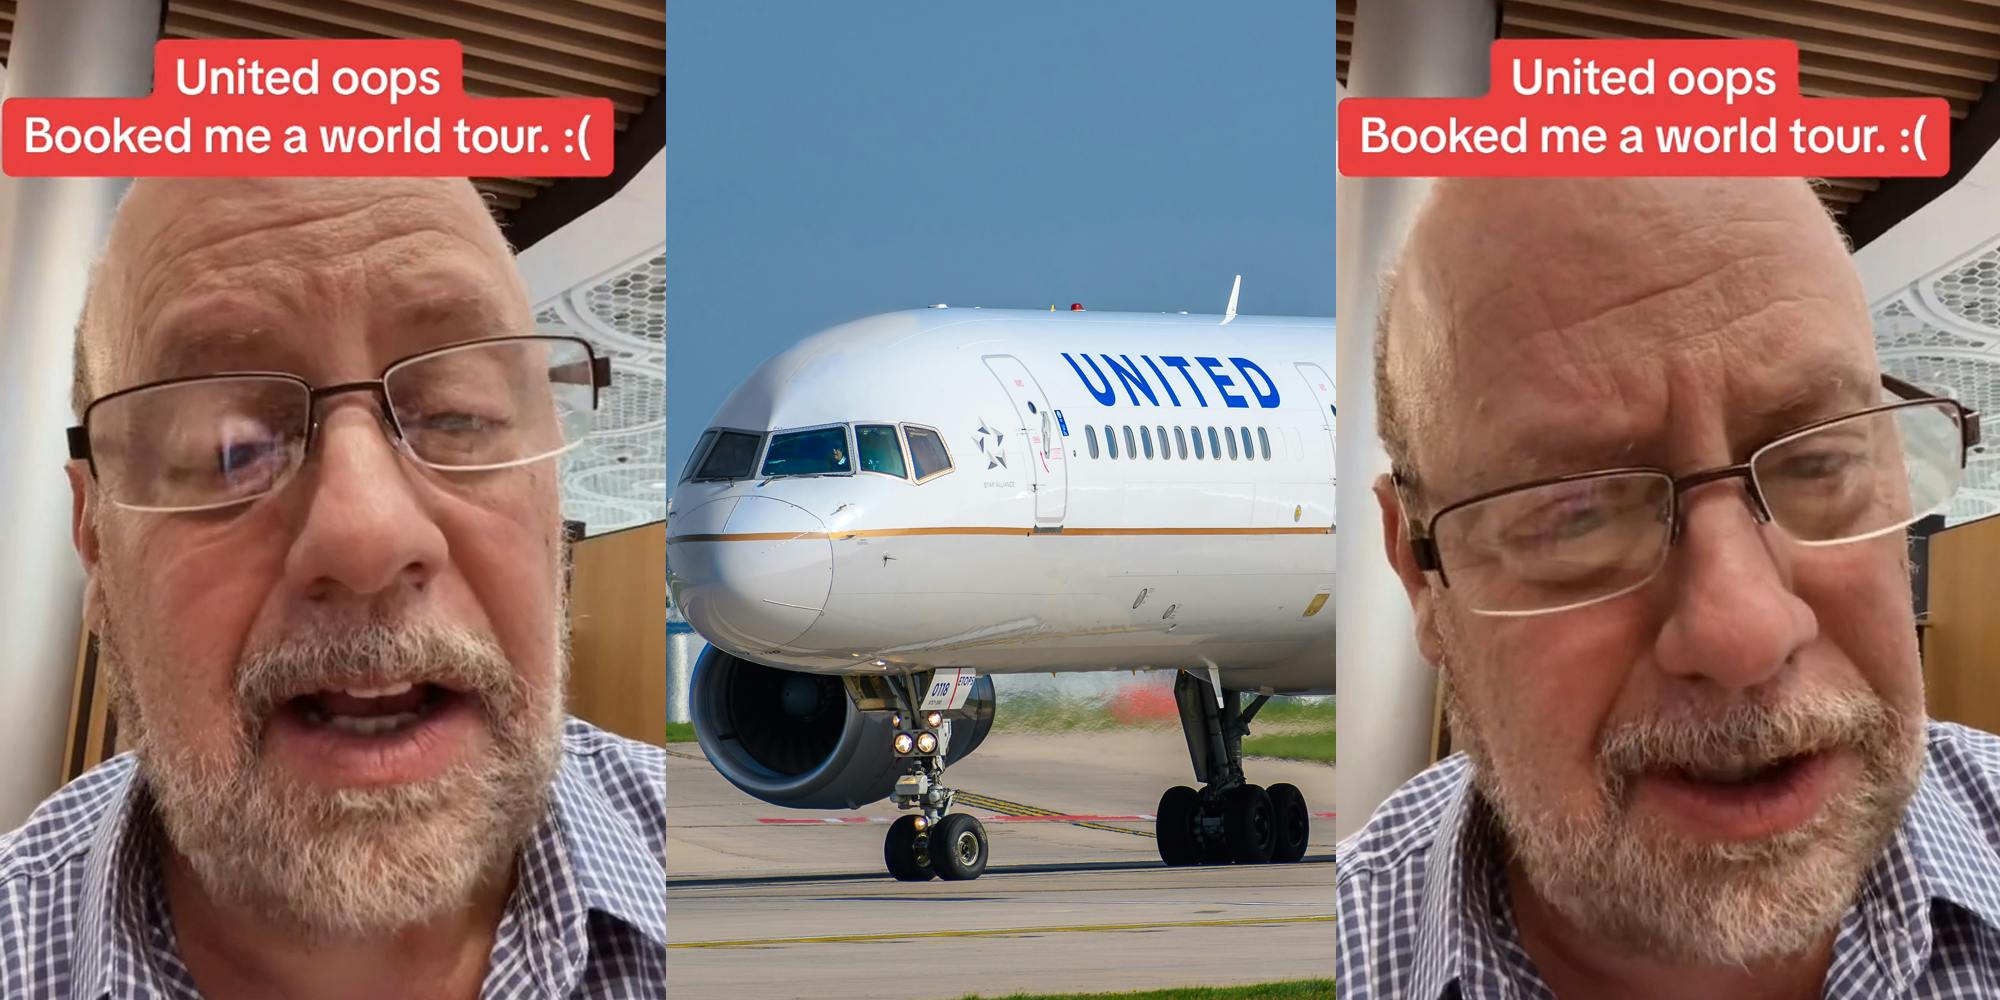 United Airlines passenger speaking with caption 'United oops Booked me a world tour. :(' (l) United Airlines plane in runway (c) United Airlines passenger speaking with caption 'United oops Booked me a world tour. :(' (r)